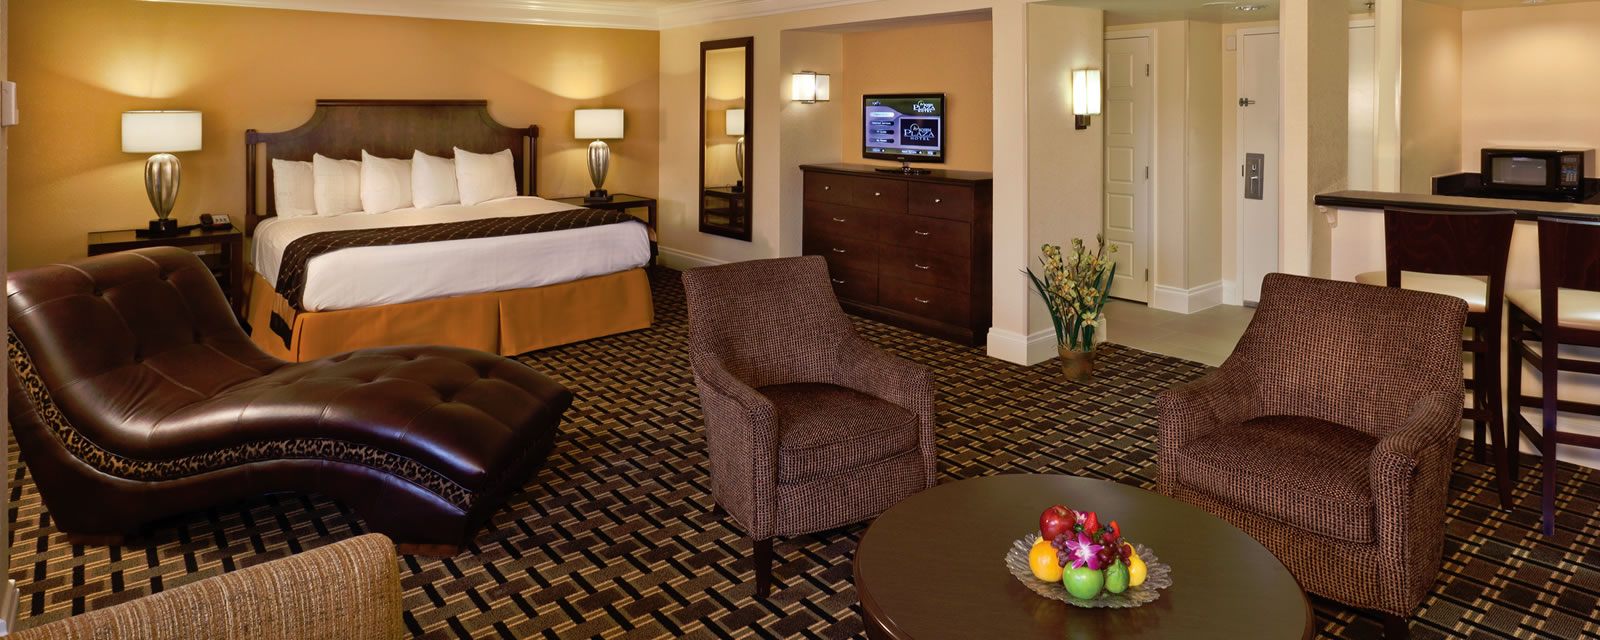 Junior Suites with bed, chairs, tvs, and table with fruit